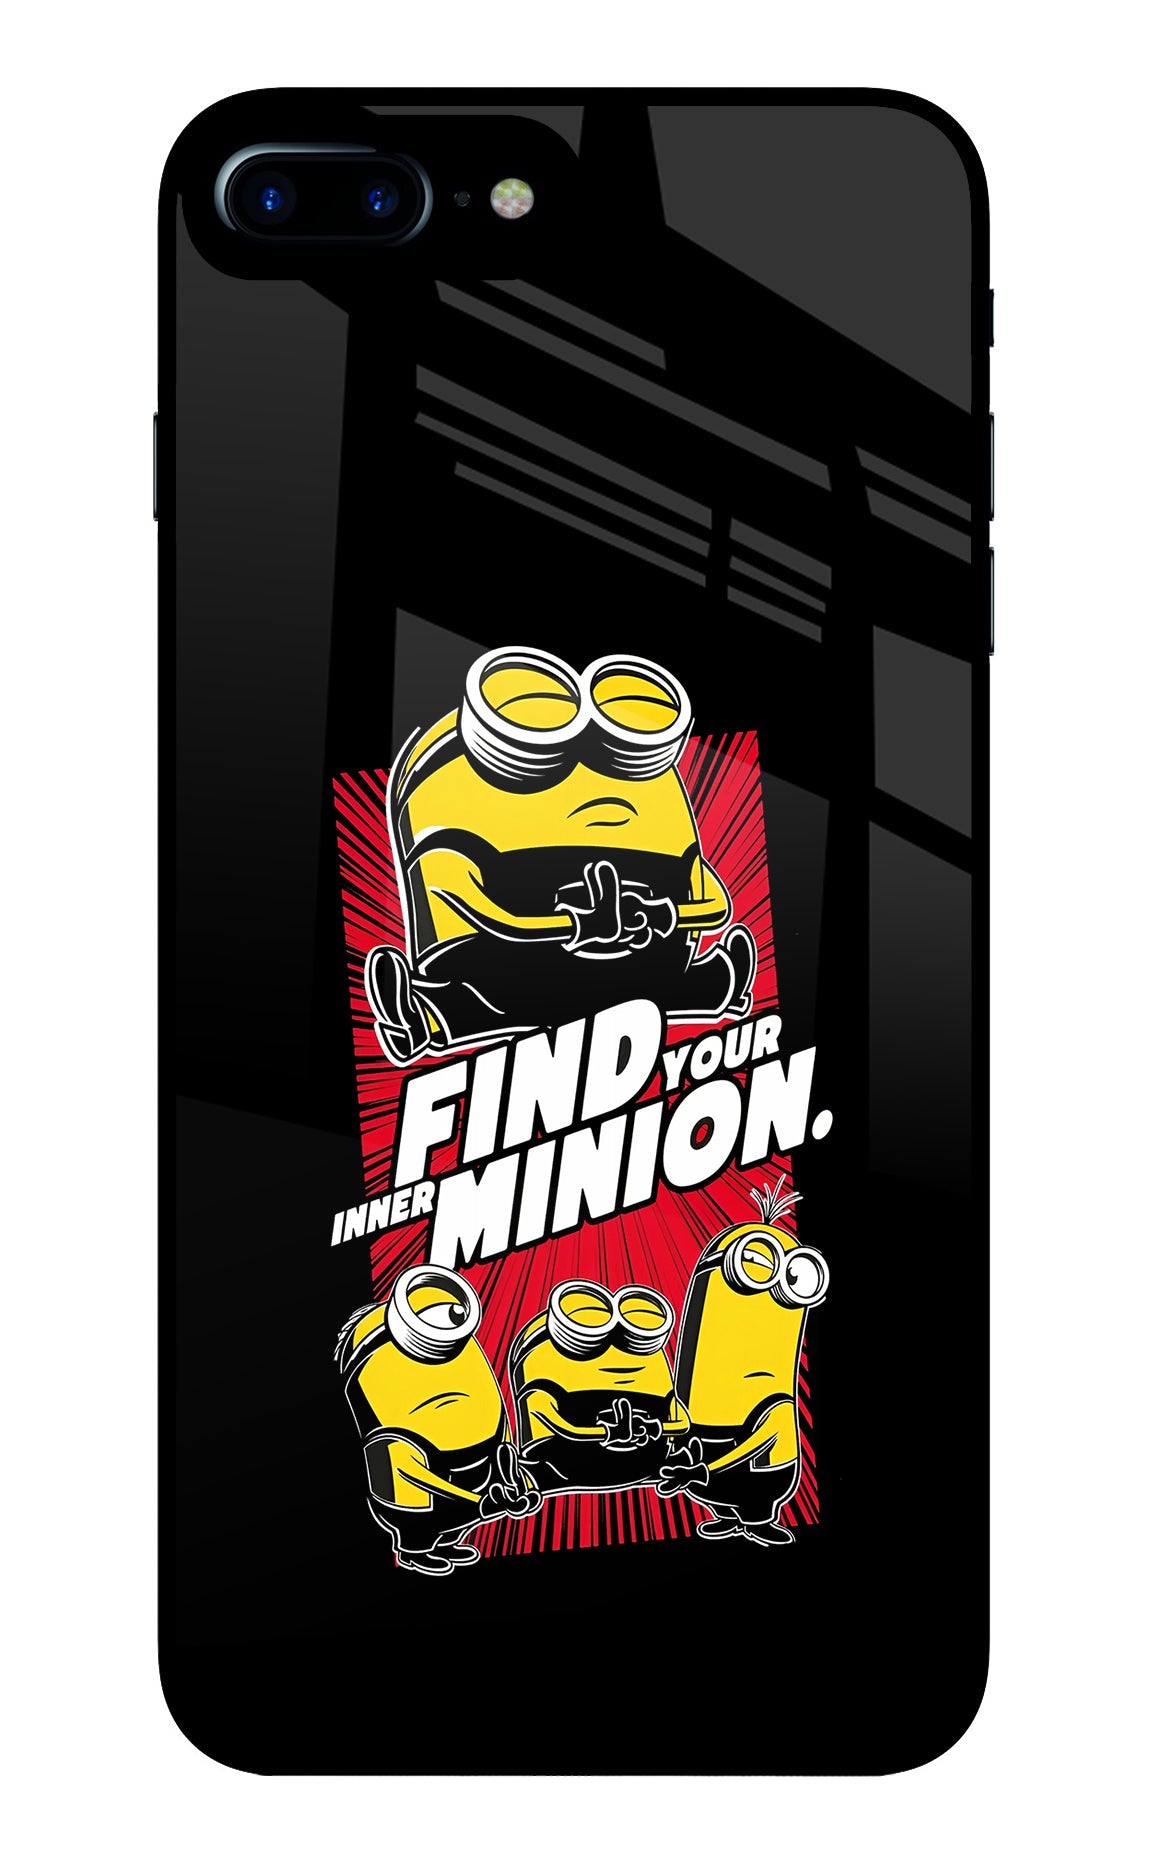 Find your inner Minion iPhone 7 Plus Glass Case